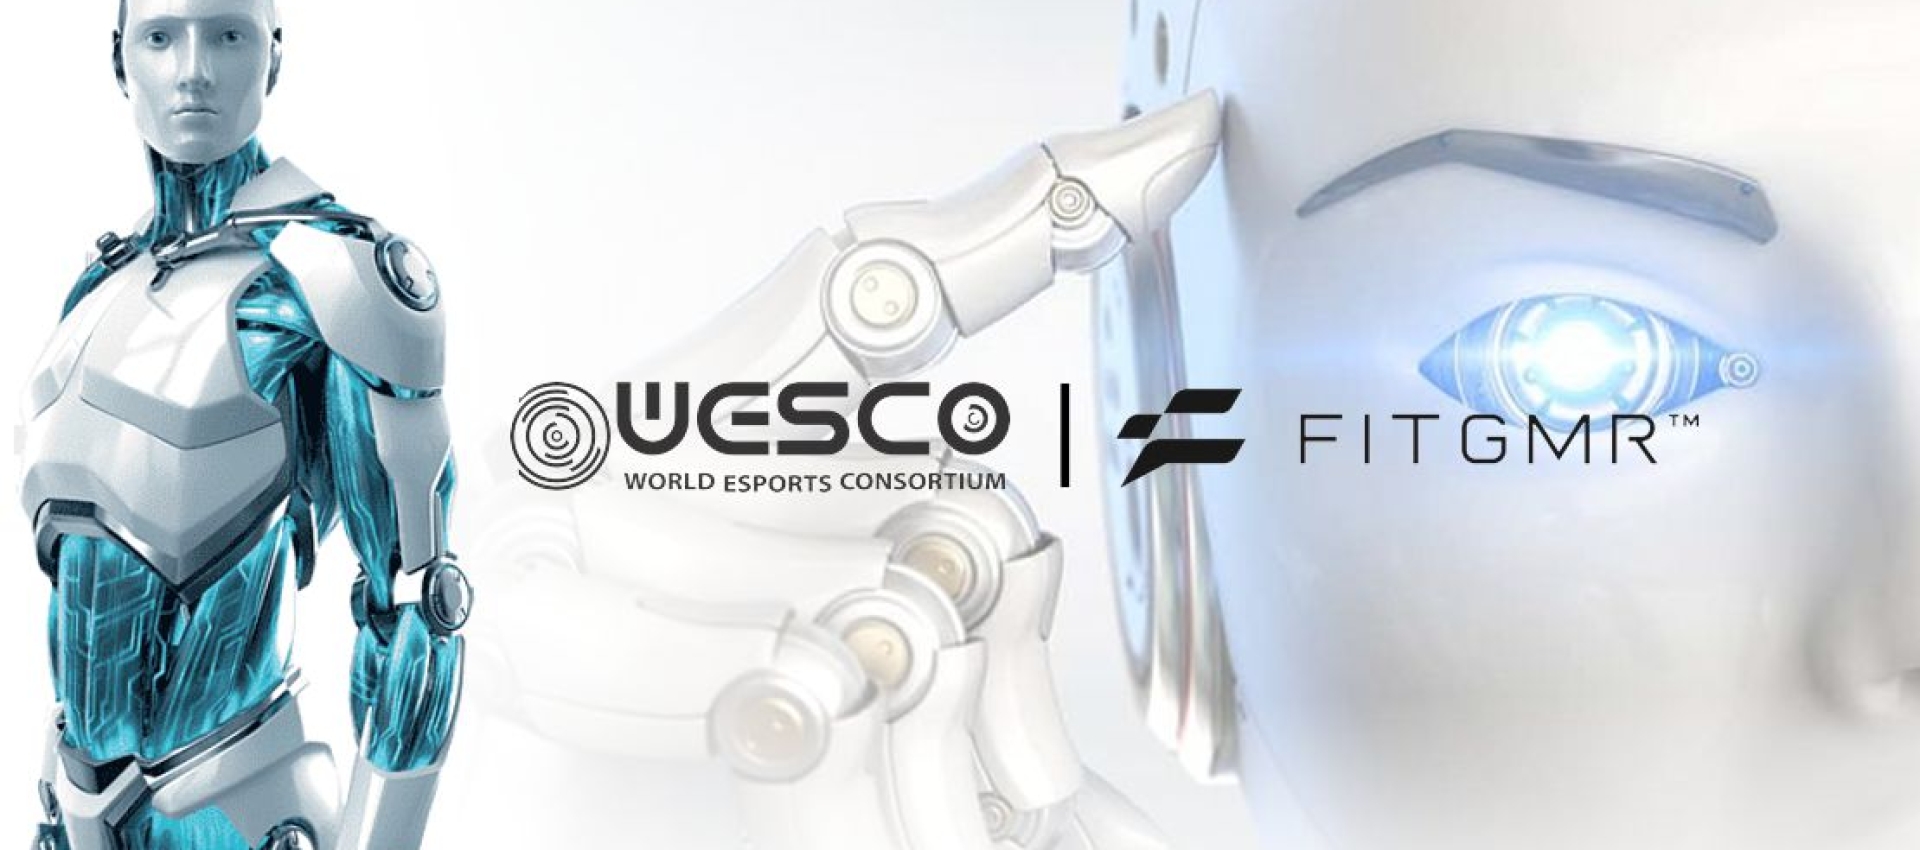 WESCO Partners with FITGMR 